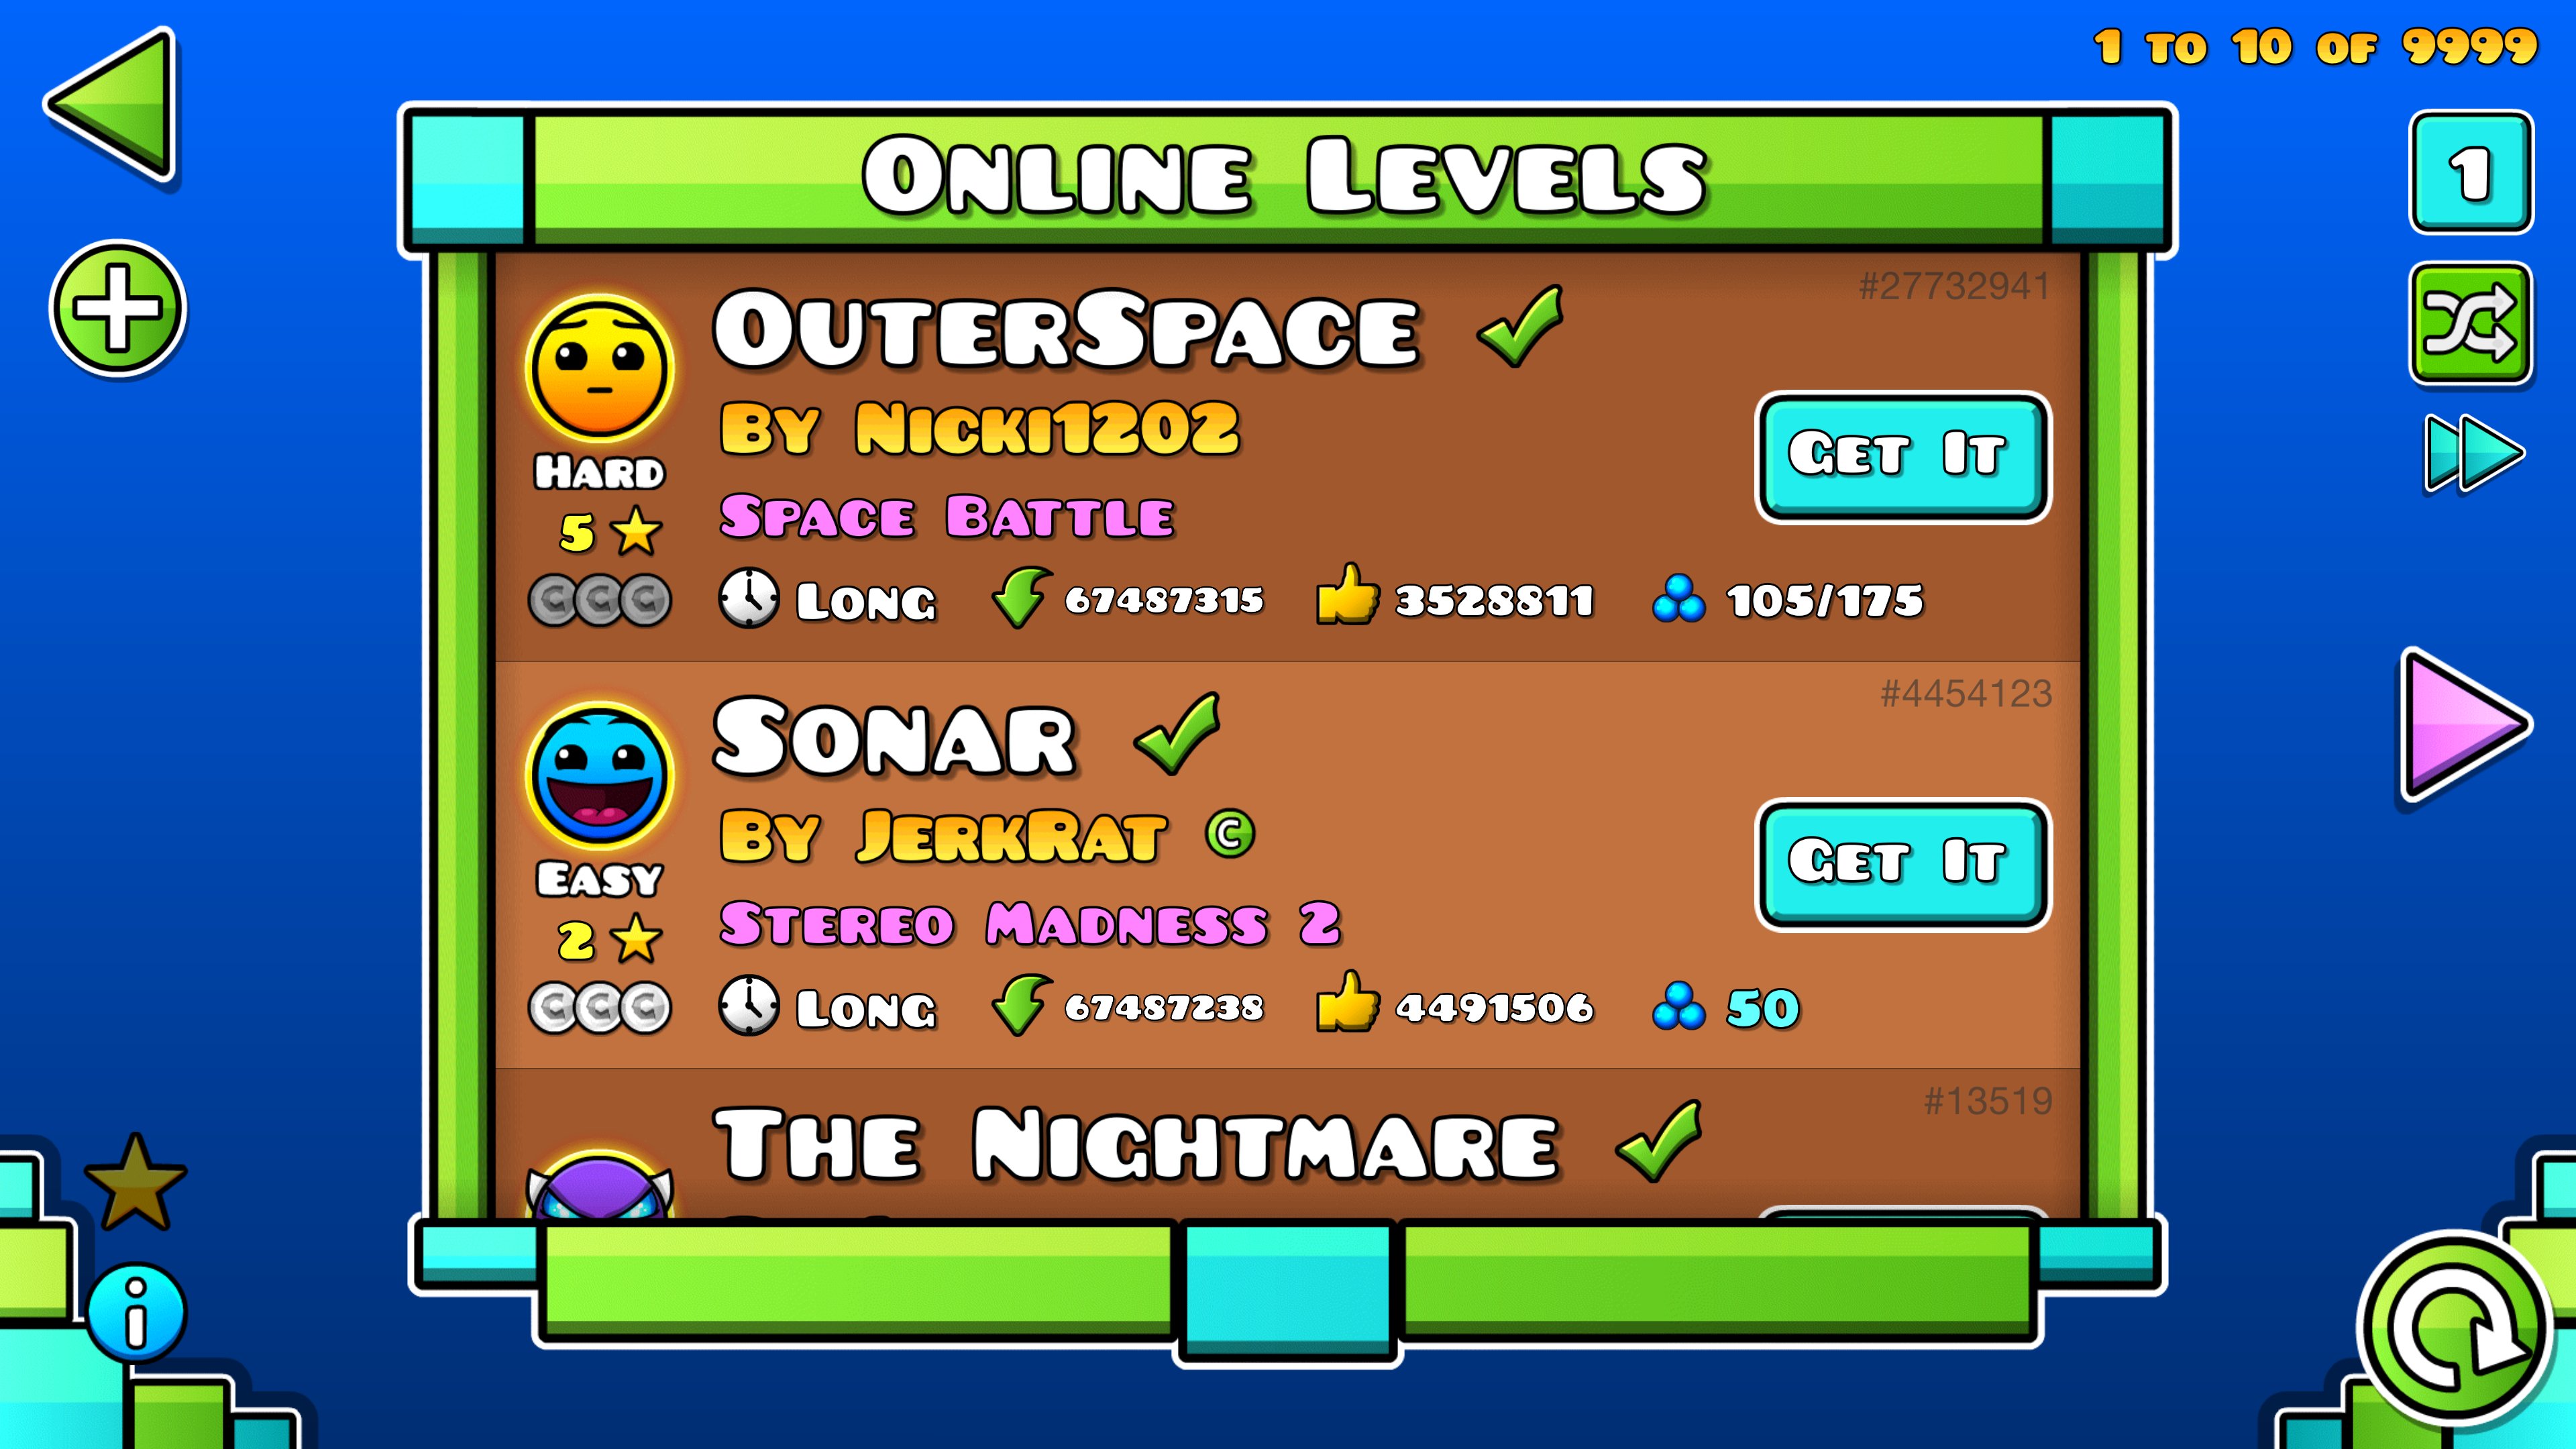 Geometry Dash Level "OuterSpace" Passes "Sonar" To Become Most Downloaded Level